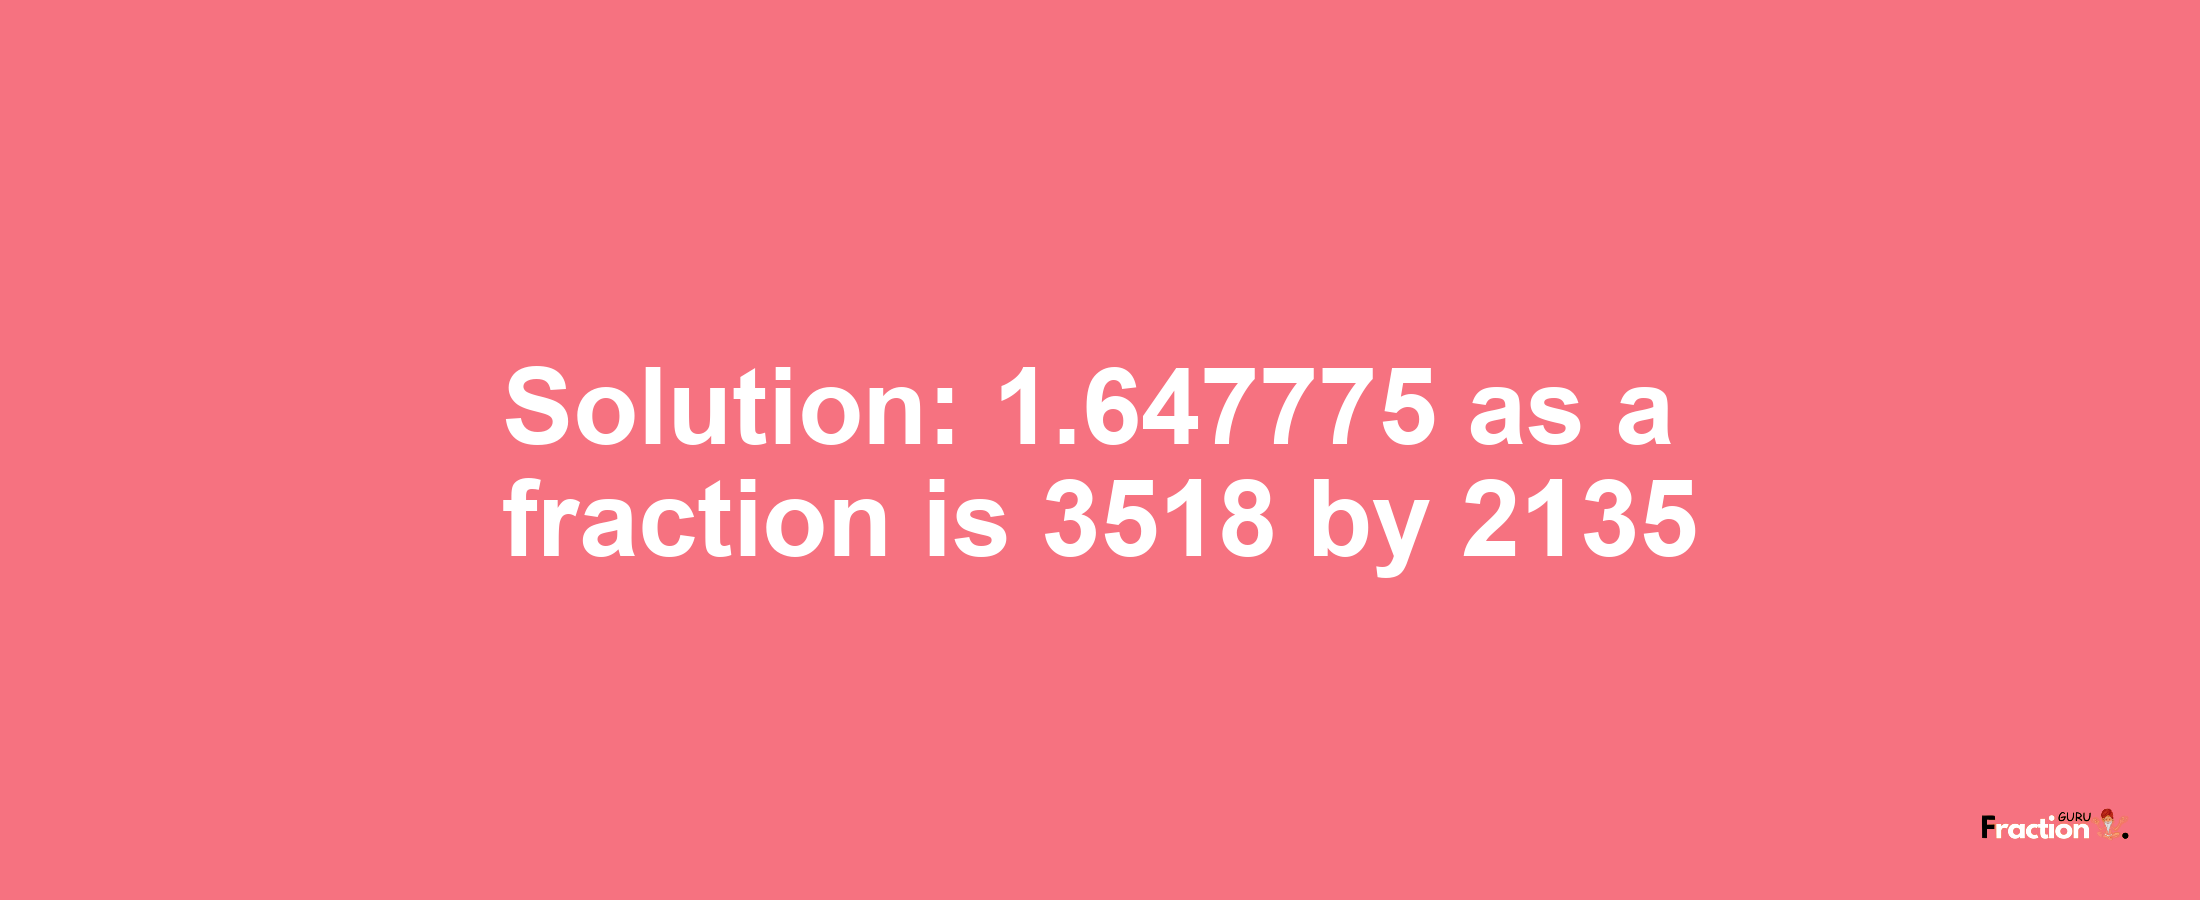 Solution:1.647775 as a fraction is 3518/2135